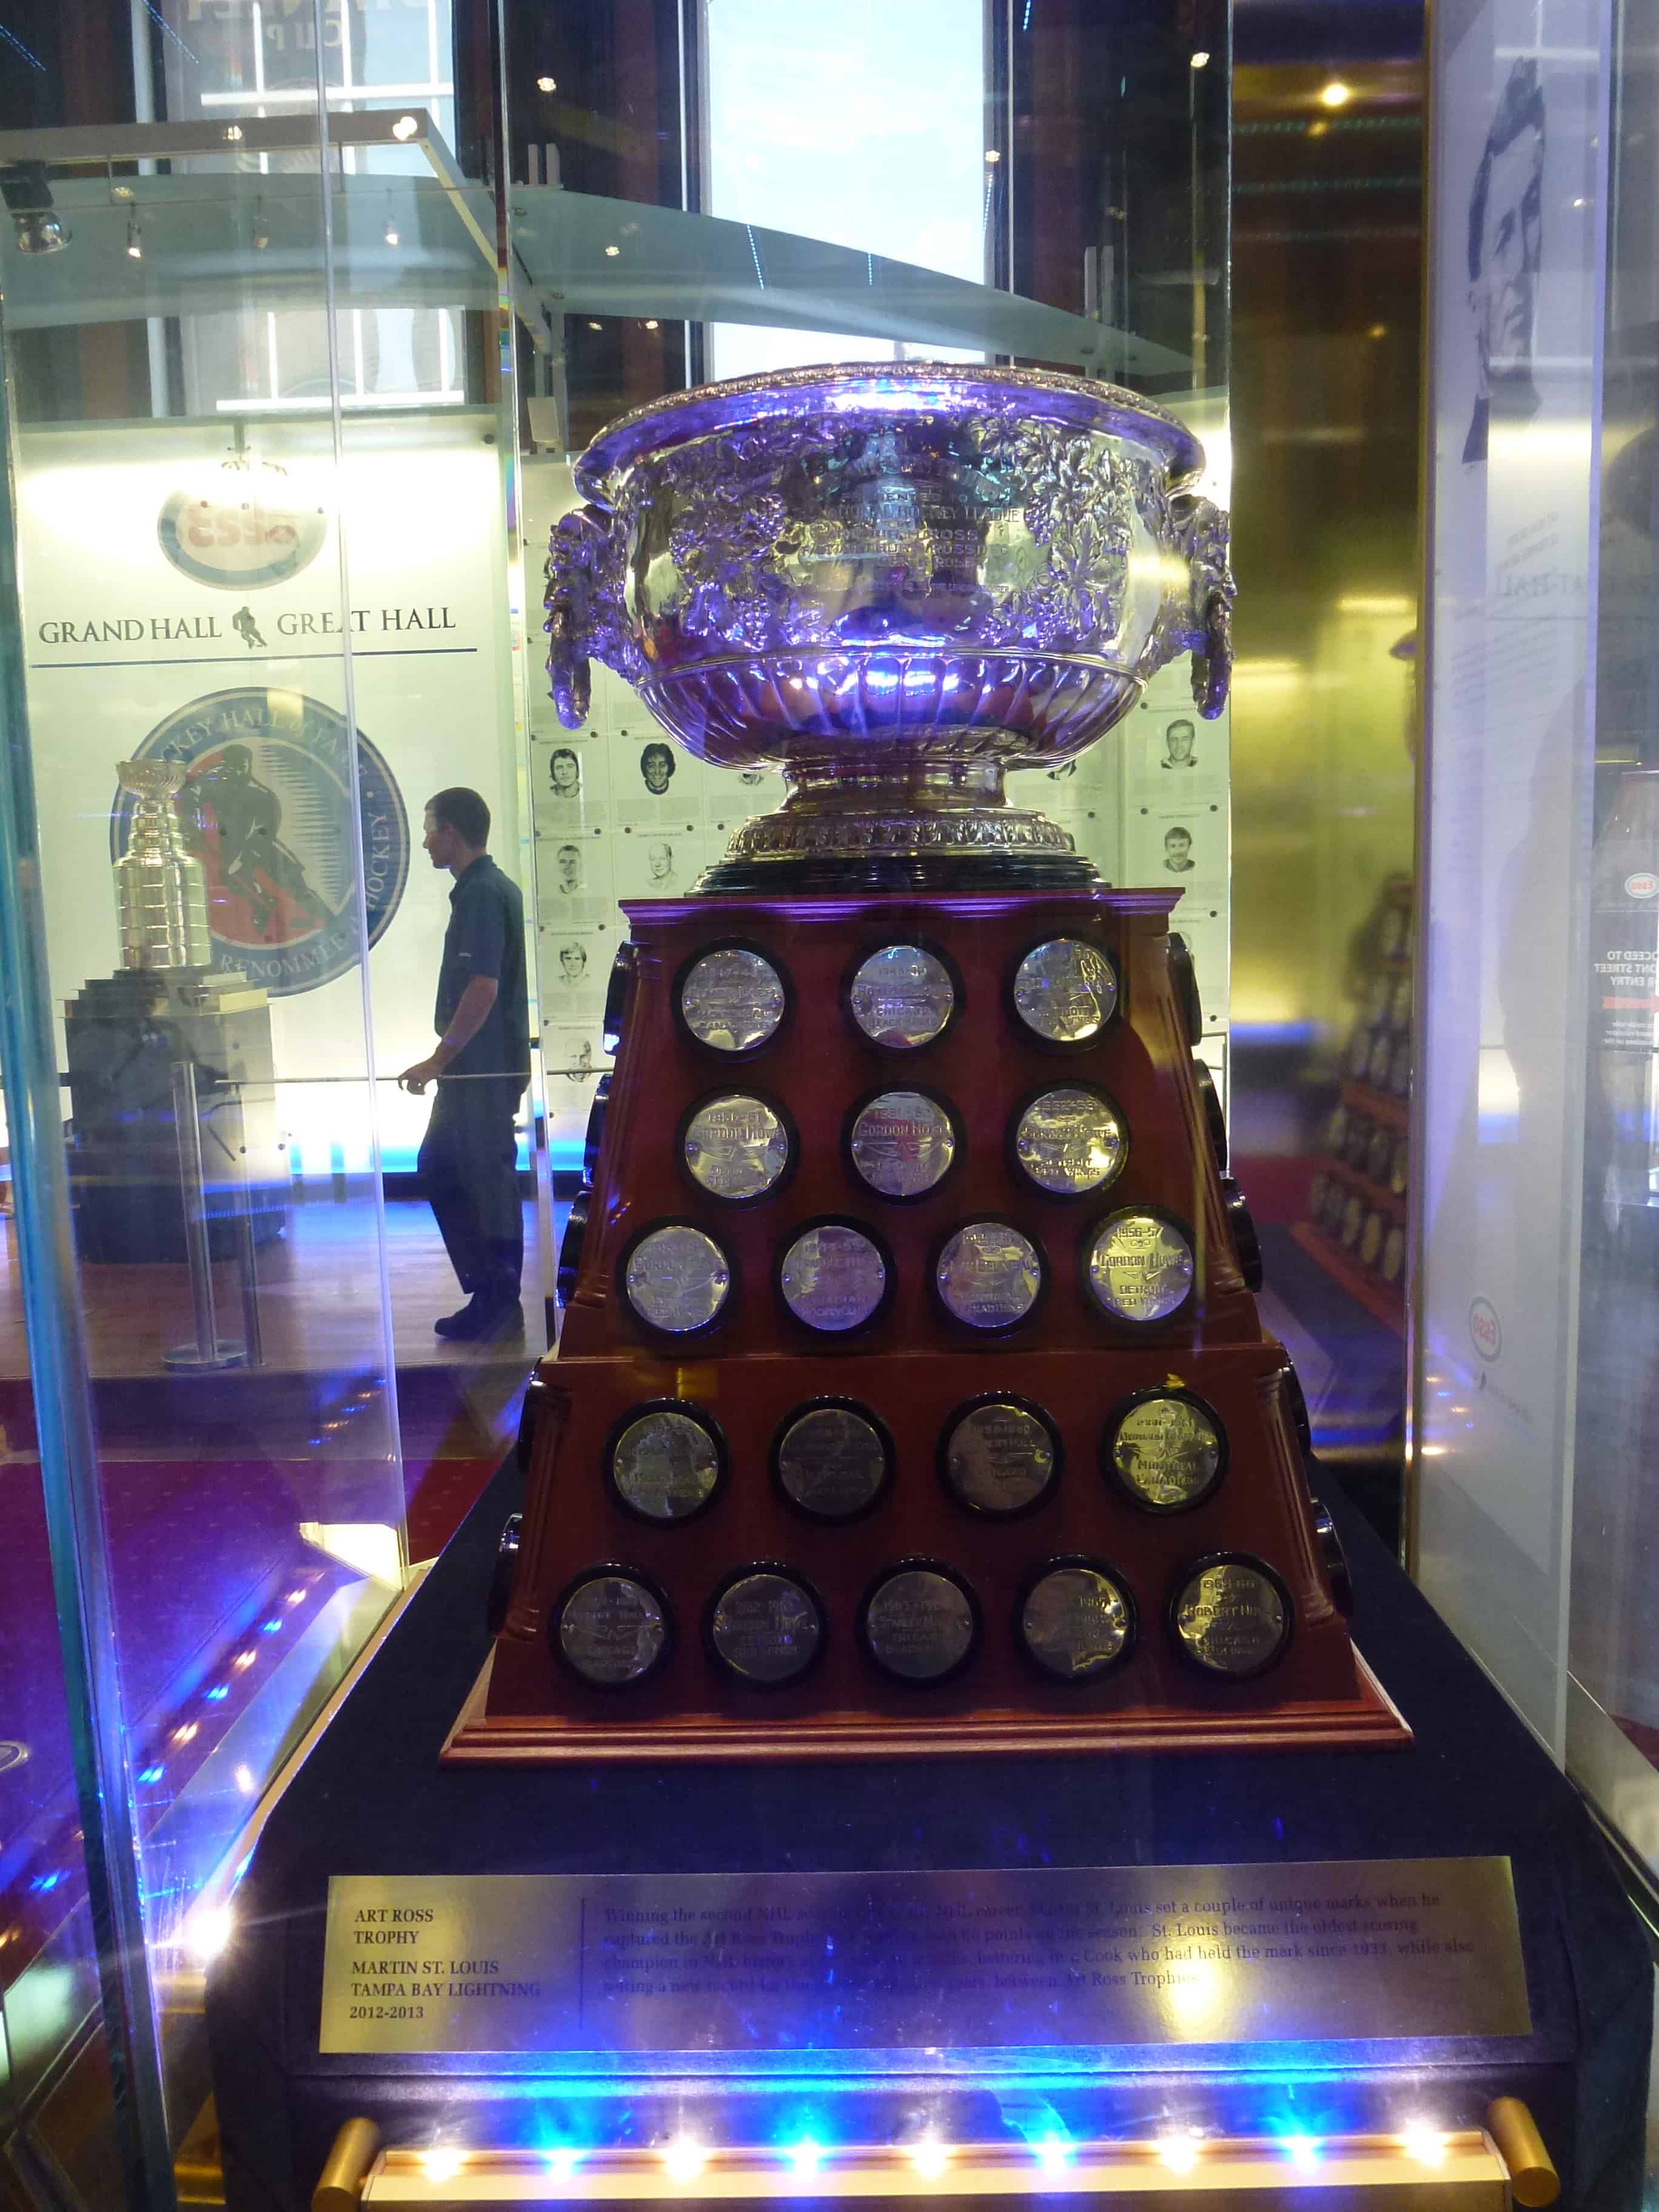 Art Ross Trophy at the Hockey Hall of Fame in Toronto, Ontario, Canada